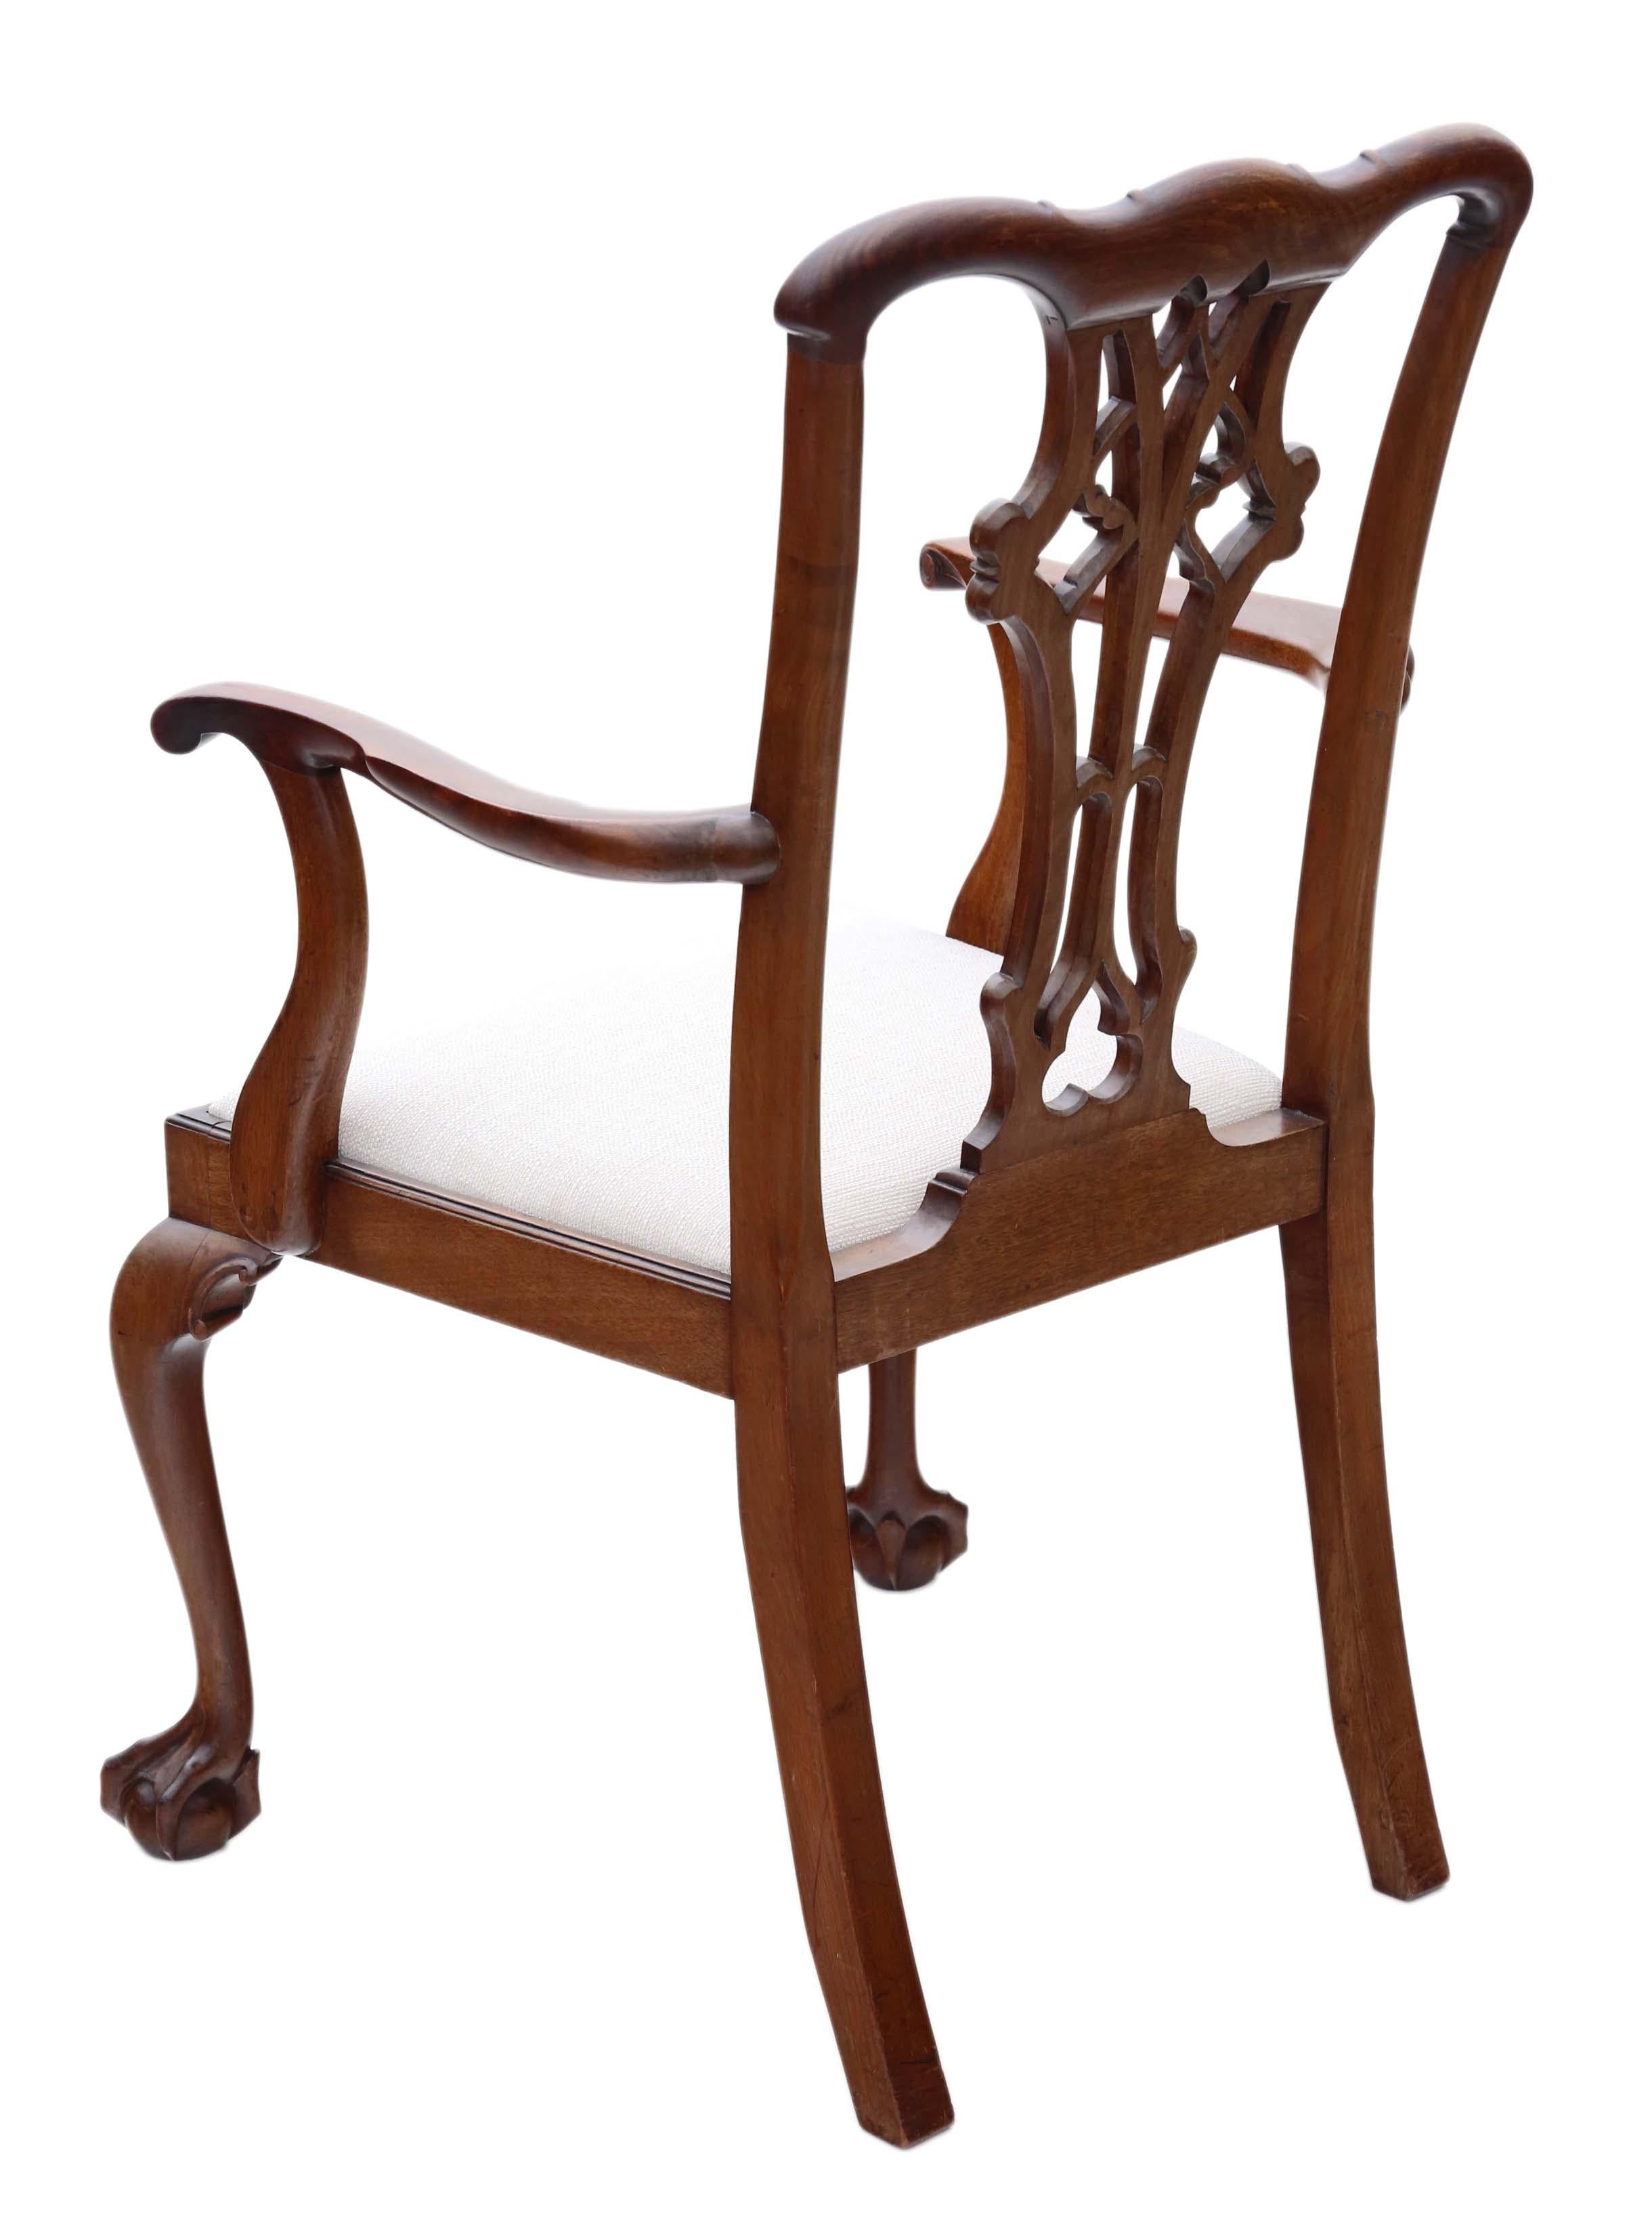 Georgian Revival Mahogany Dining Chairs: Set of 8 (6+2), Antique Quality, C1910 For Sale 3